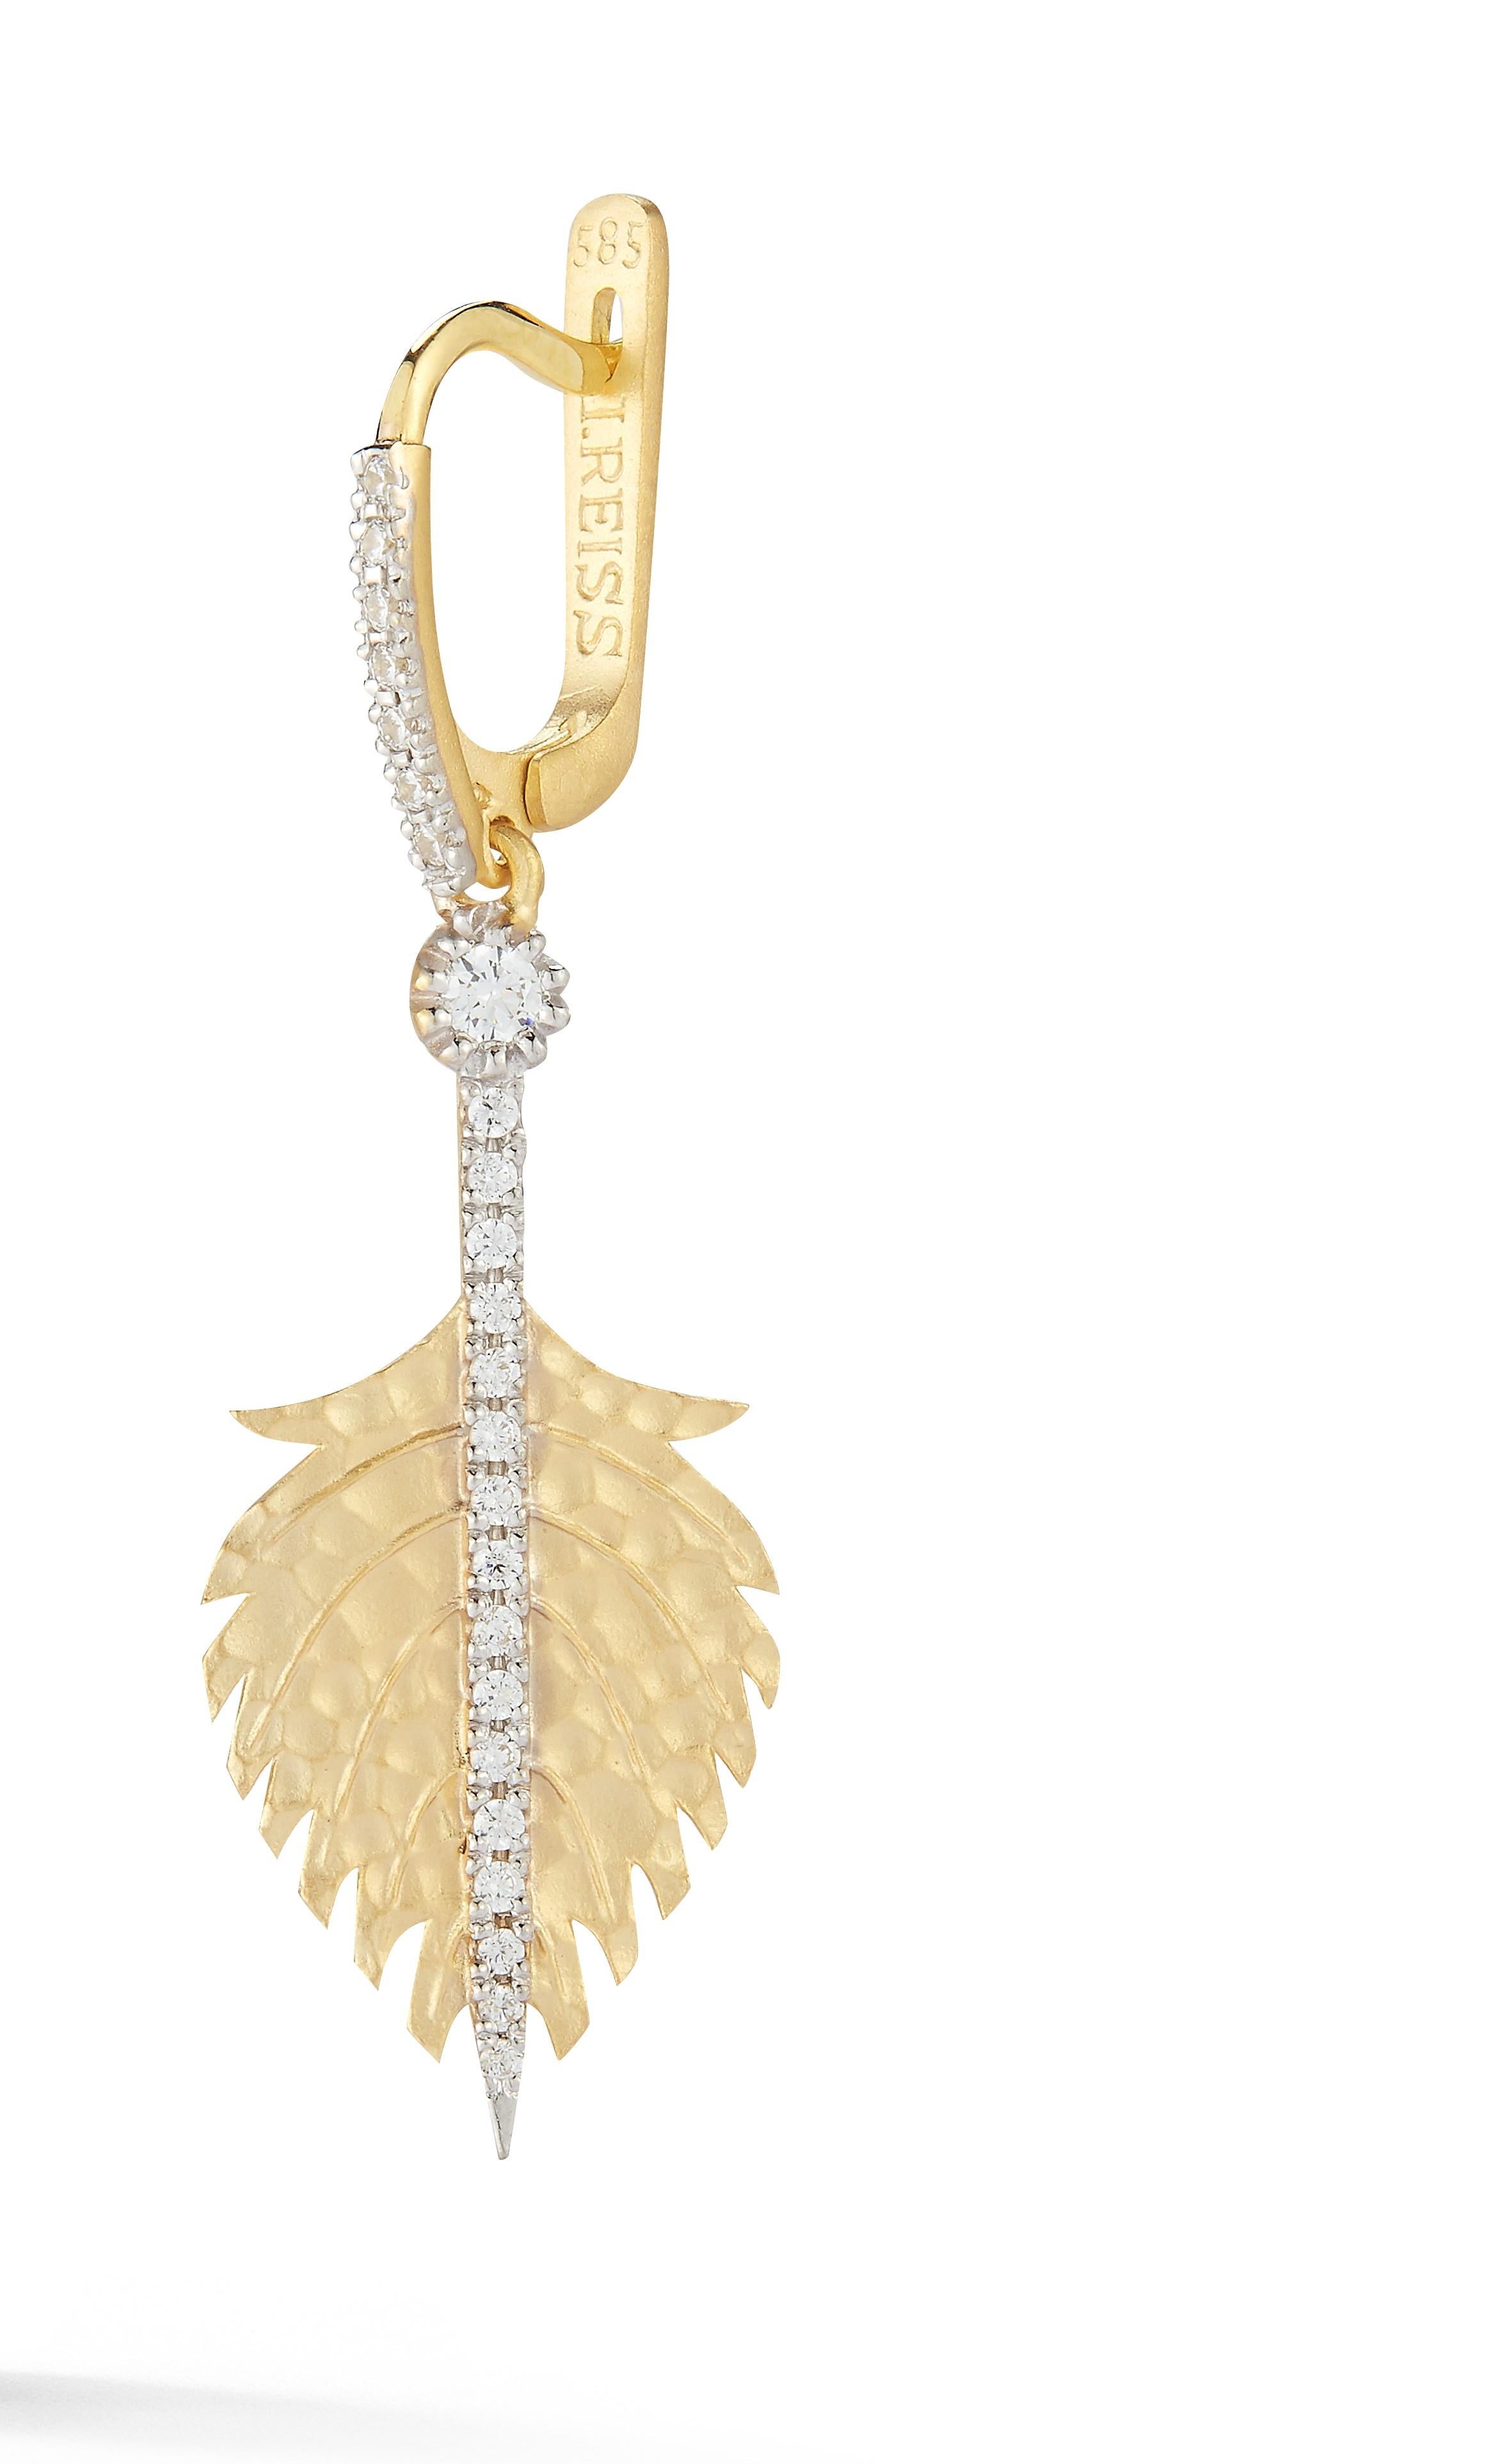 14 Karat Yellow Gold Hand-Crafted Matte and Hammer-Finished Dangling Feather Earrings, Accented with 0.45 Carats of Pave Set Diamonds on a Lever Back Closure.
